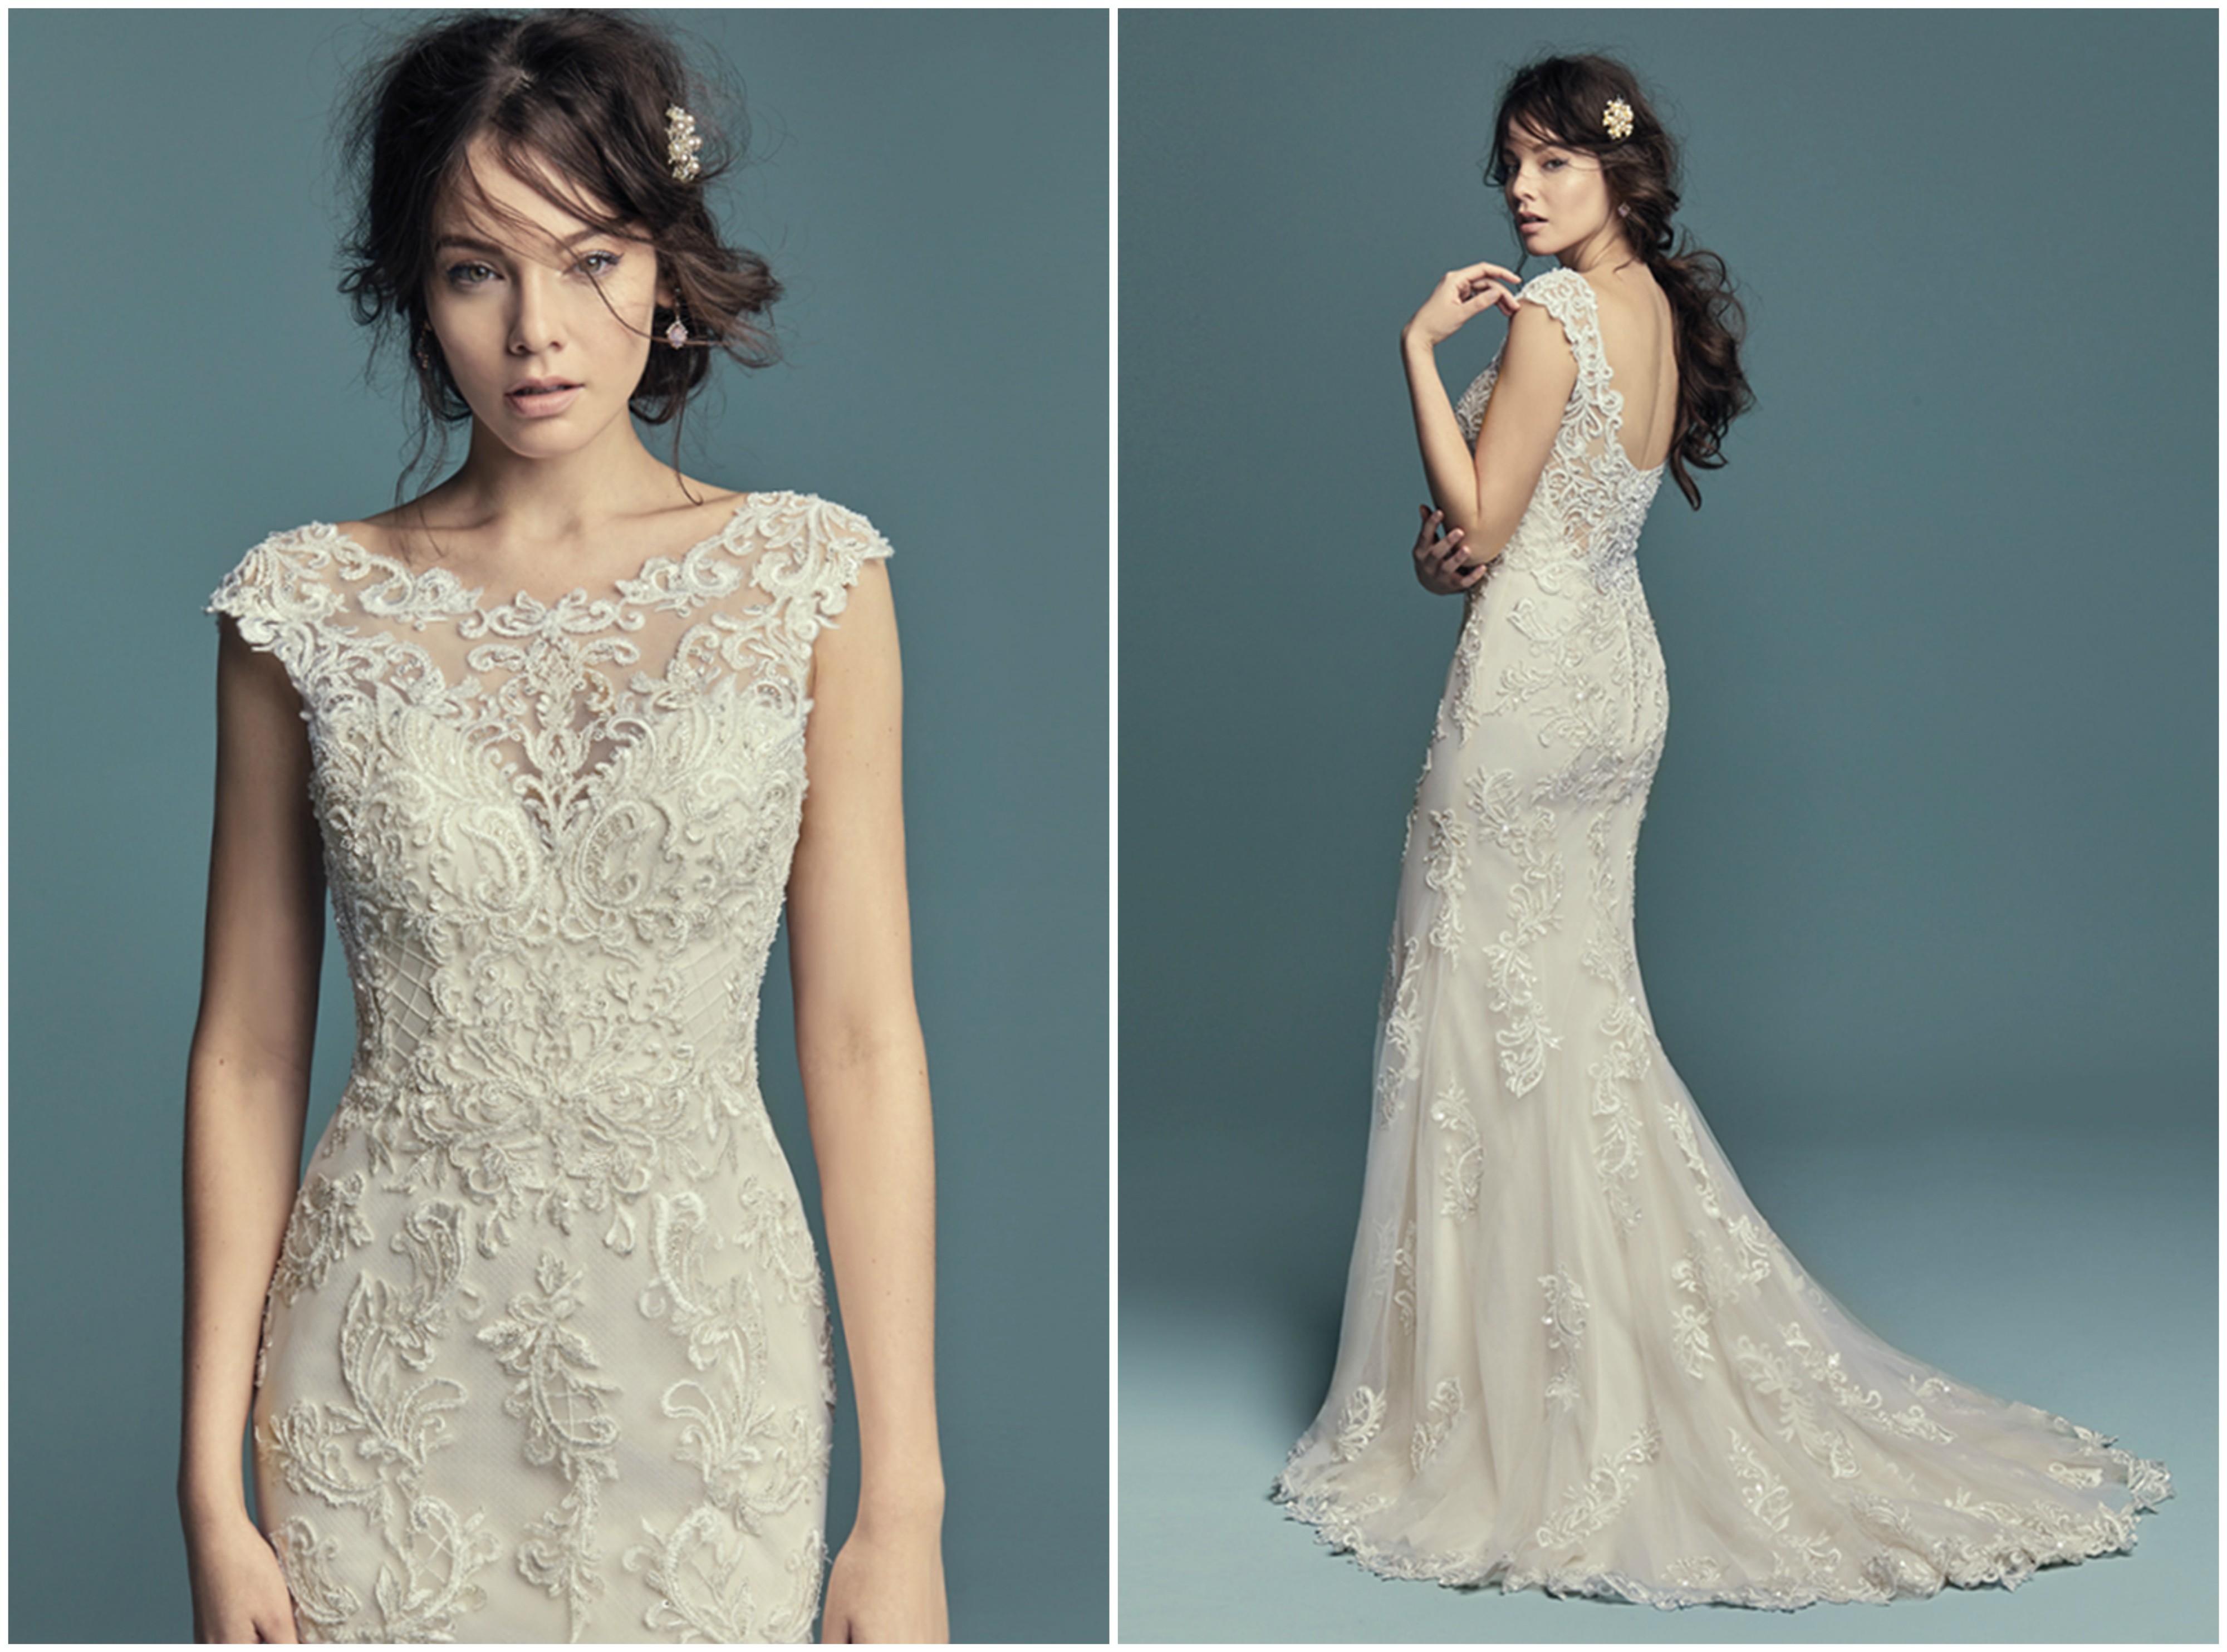 <a href="https://www.maggiesottero.com/maggie-sottero/rosanna/11504" target="_blank">Maggie Sottero</a>